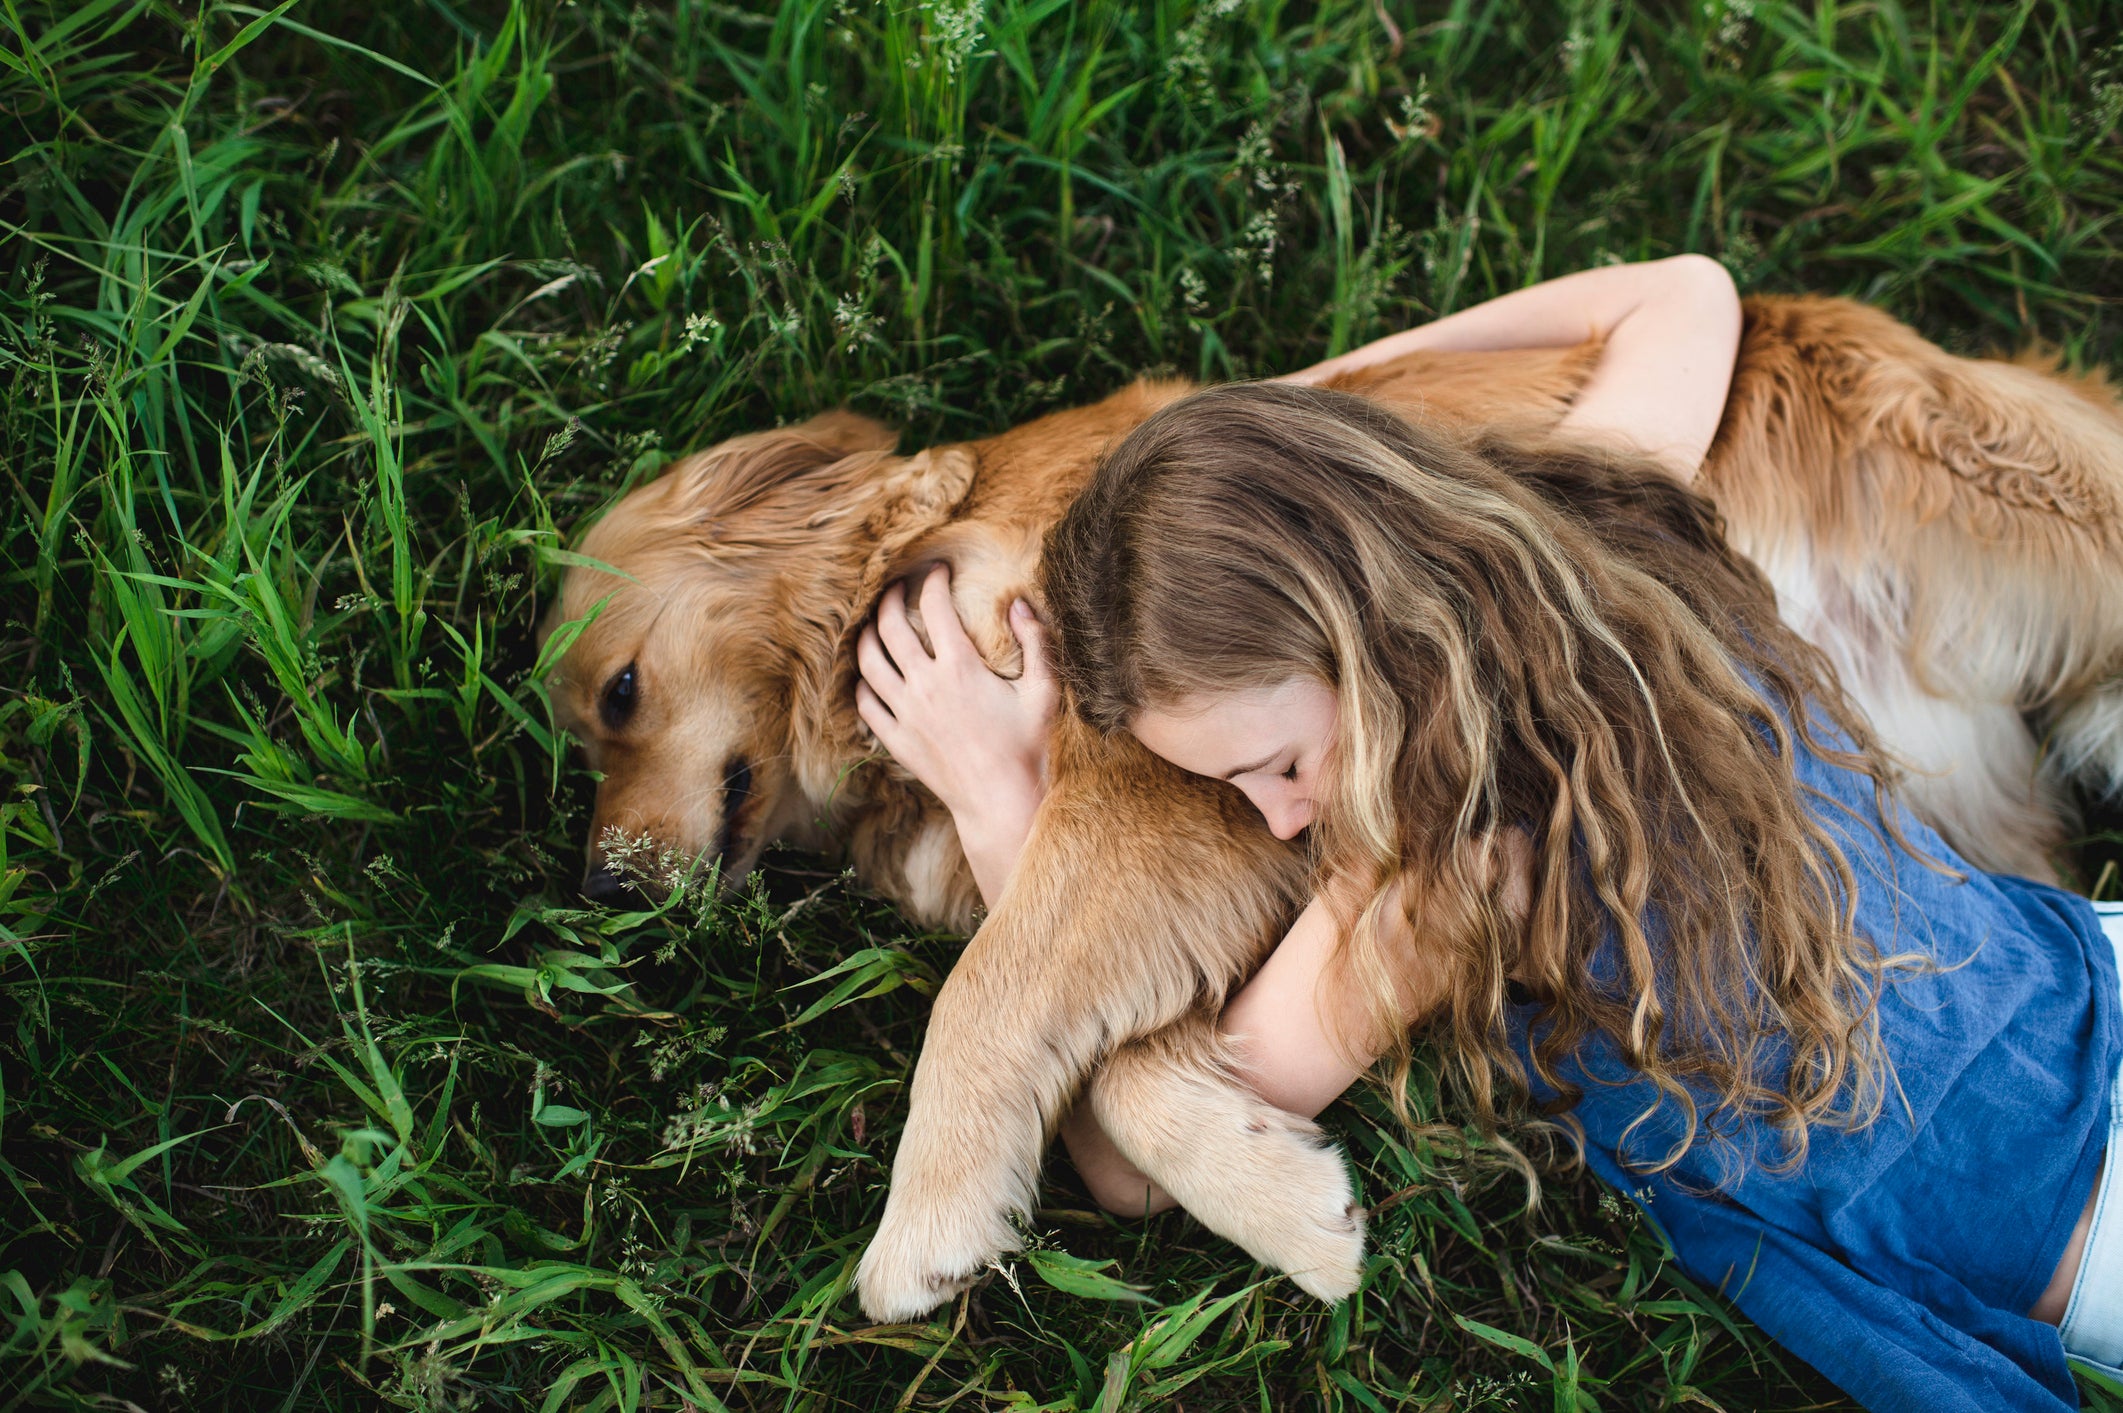 Are Emotional Support Animals Necessary or Just Glorified Pets? -  Scientific American